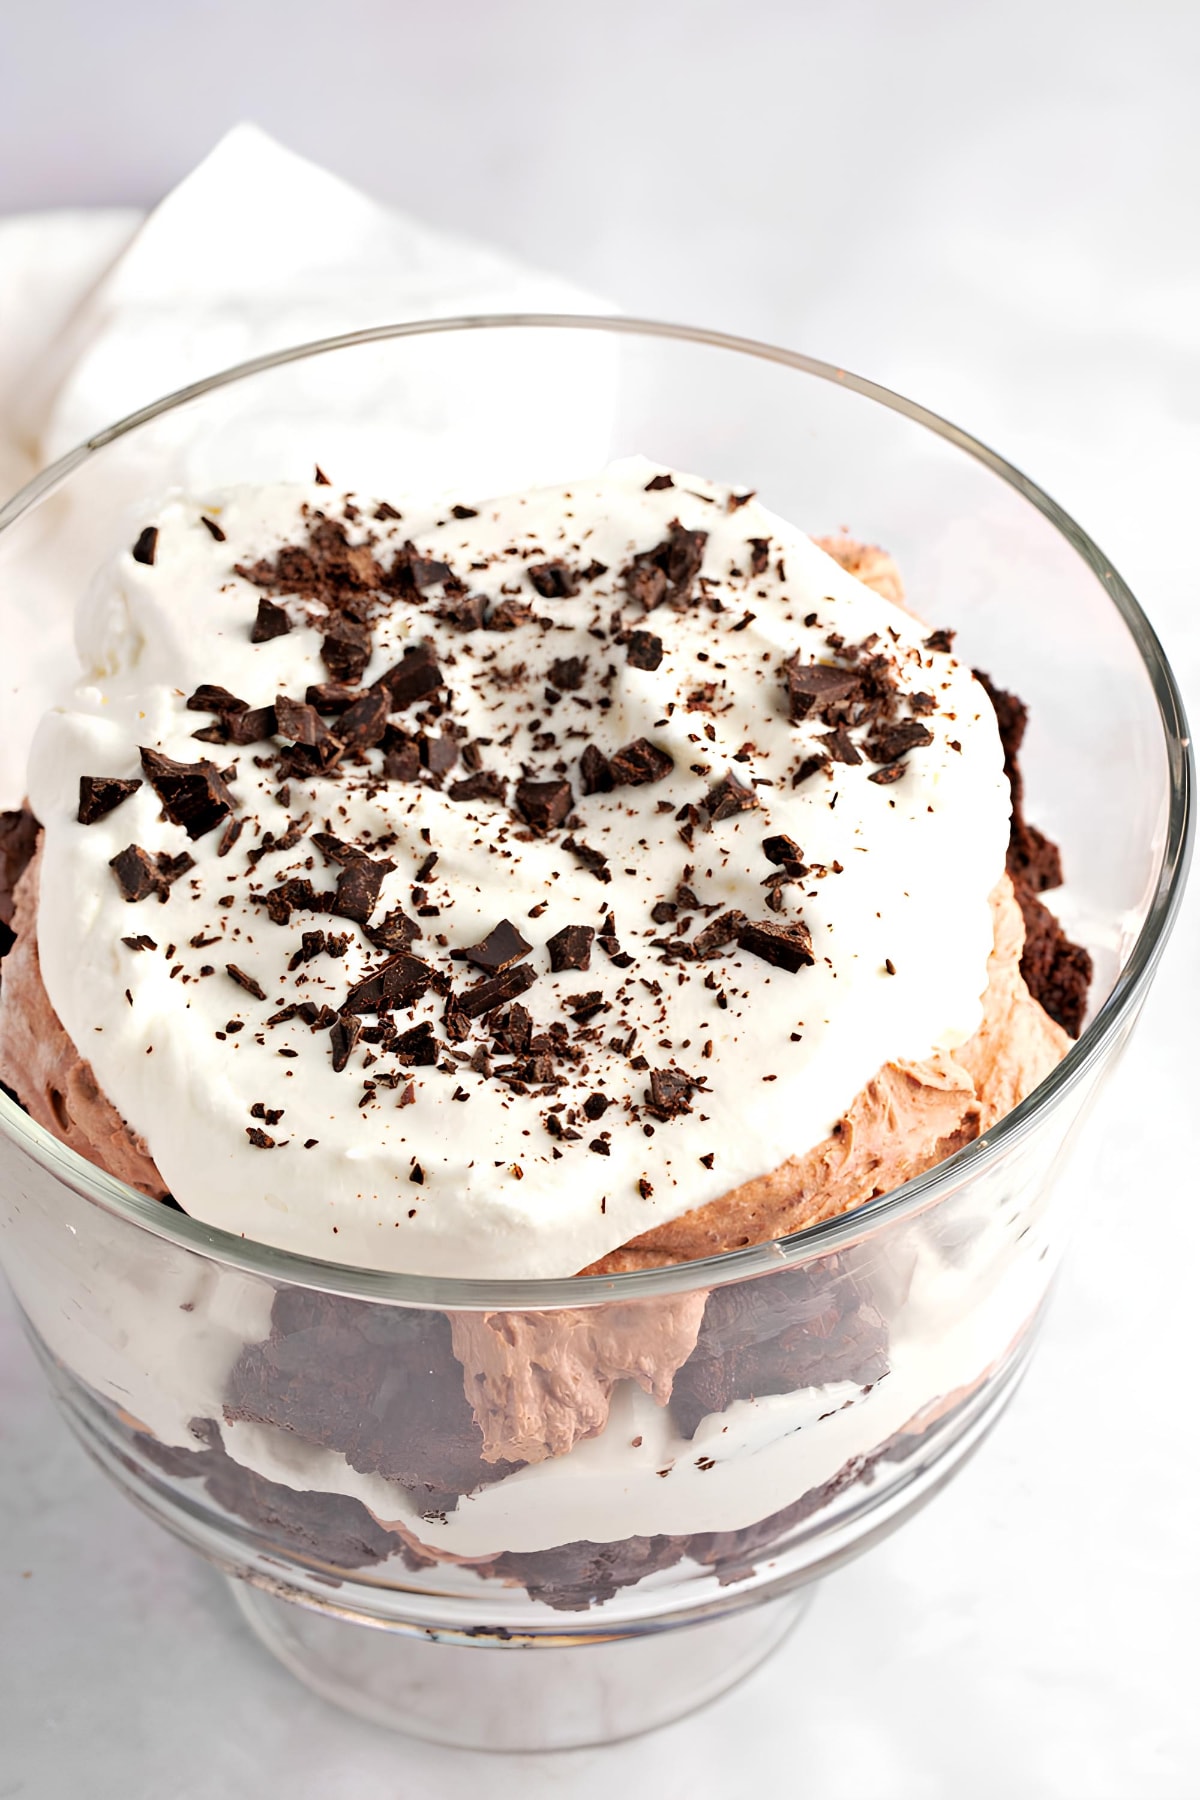 Chocolate trifle in a glass bowl topped with whipped cream and brownies, a delightful treat